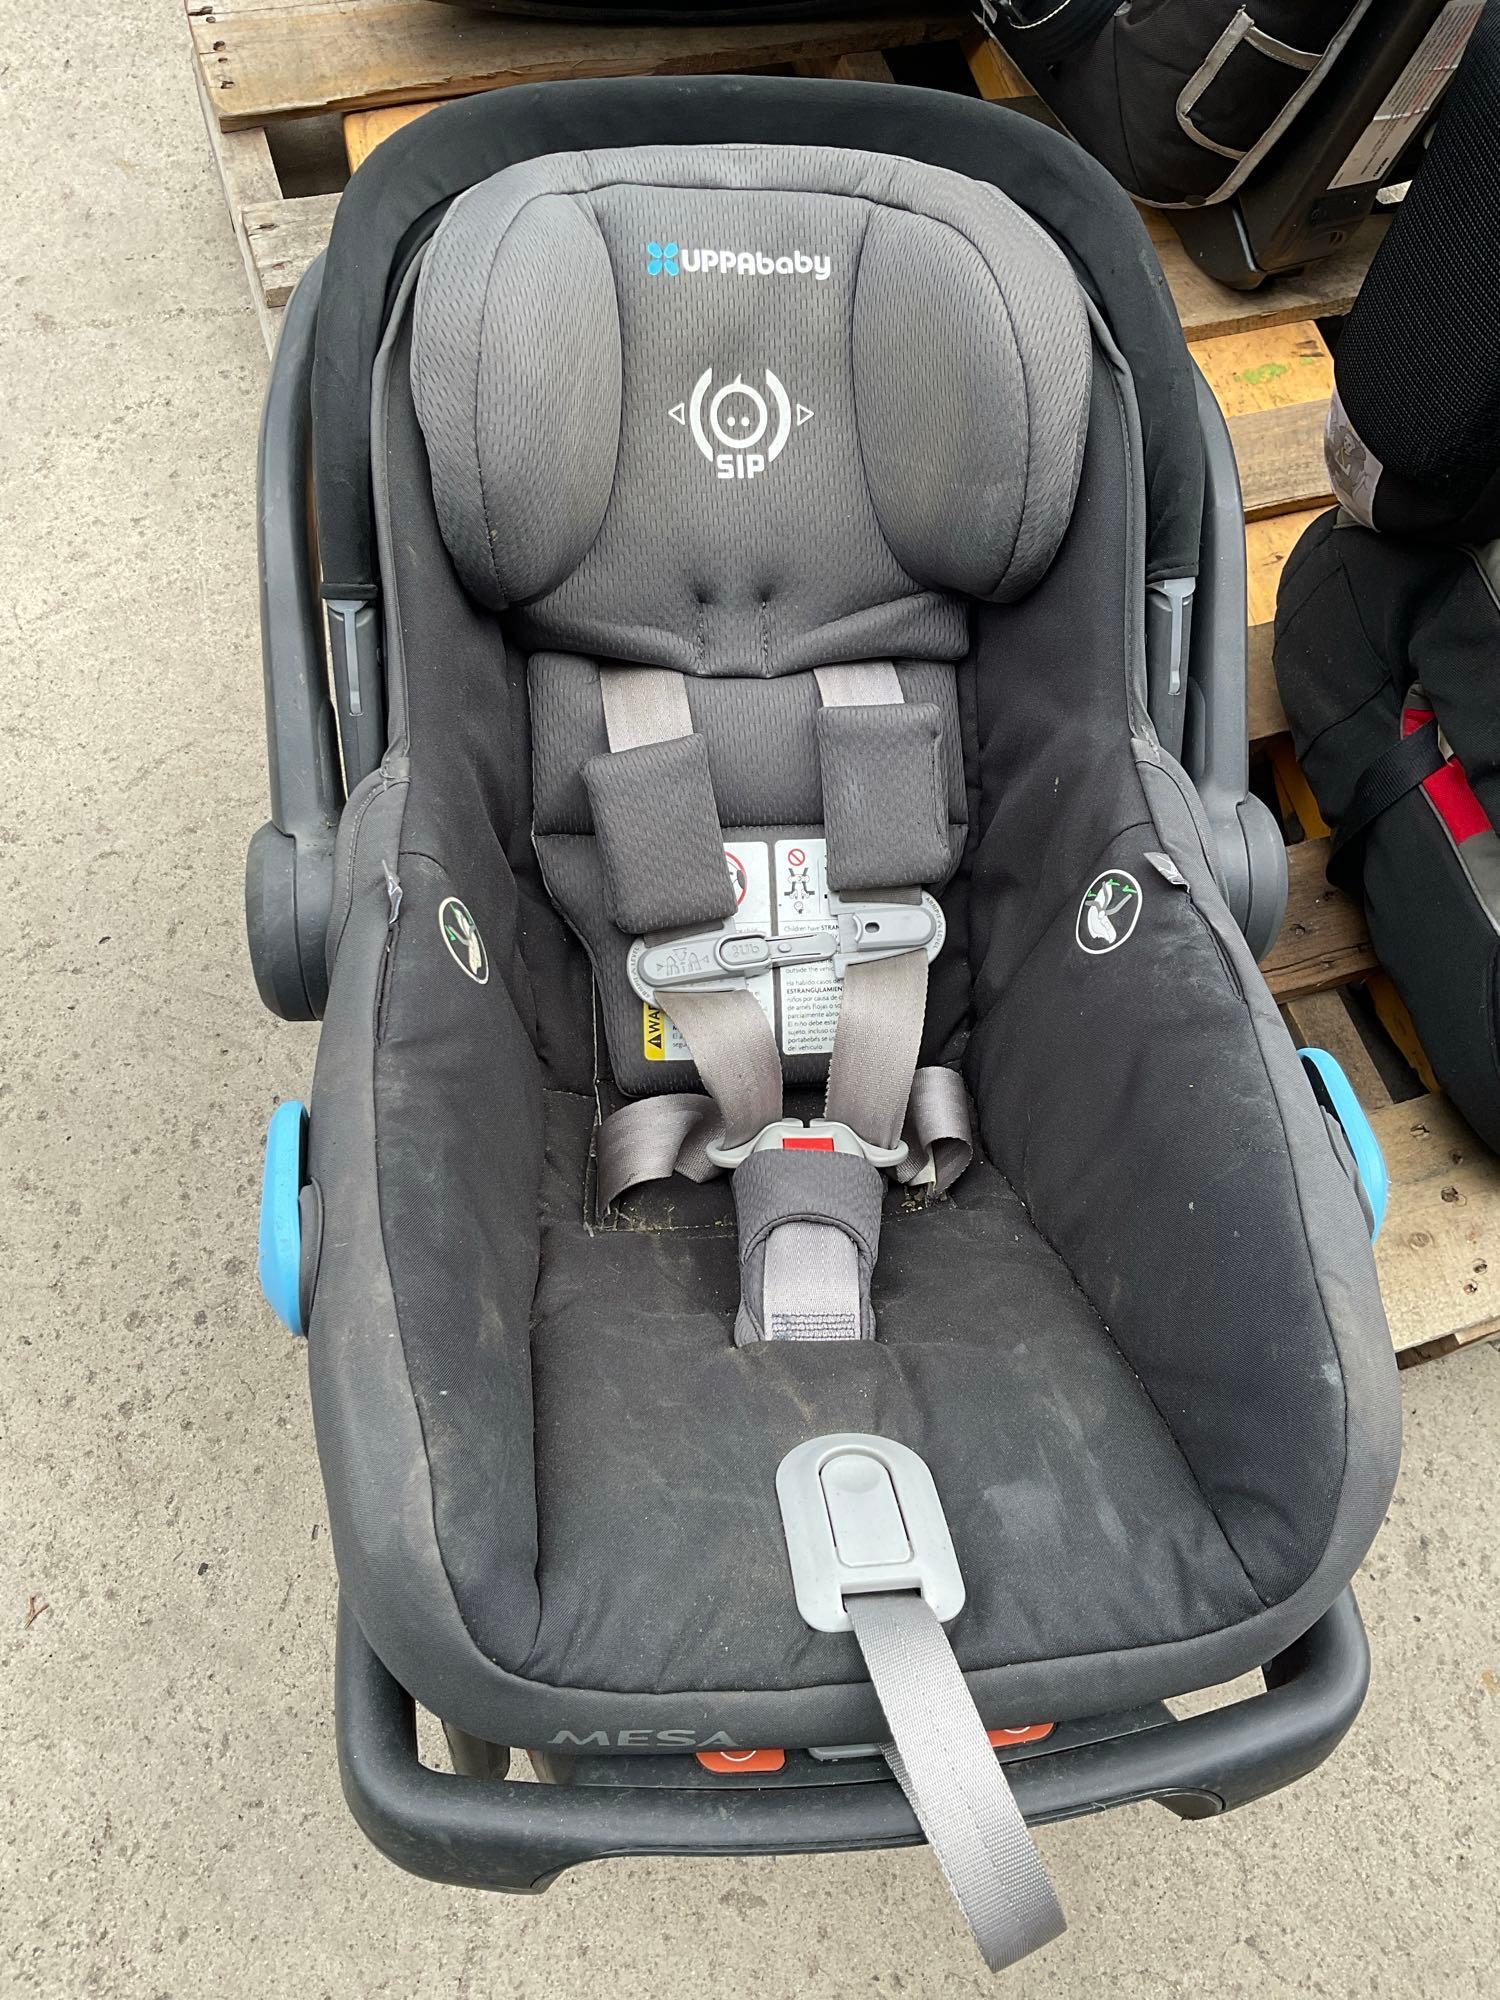 Child's Recaro & Graco car seats & Uppababy infant seat. 4 pieces